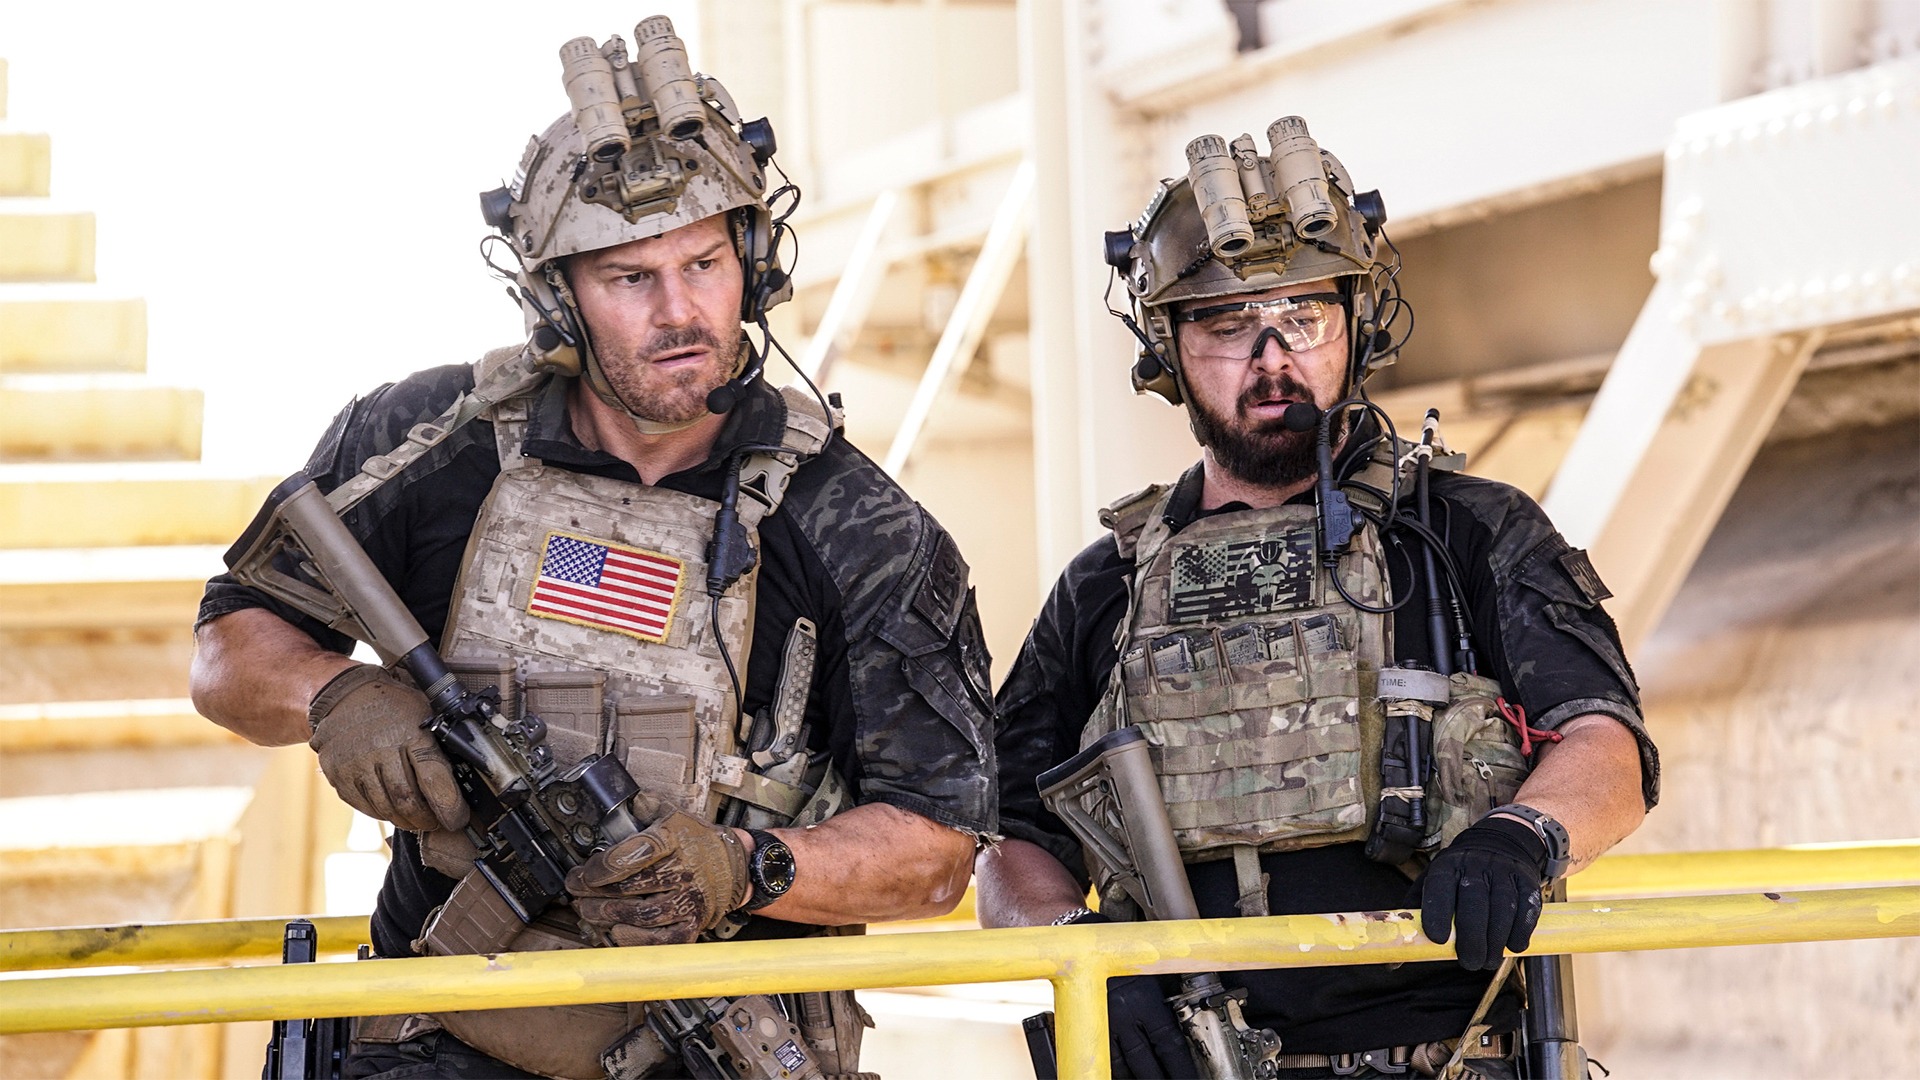 Watch SEAL Team Season 2 Episode 1 Fracture Full show on Paramount Plus